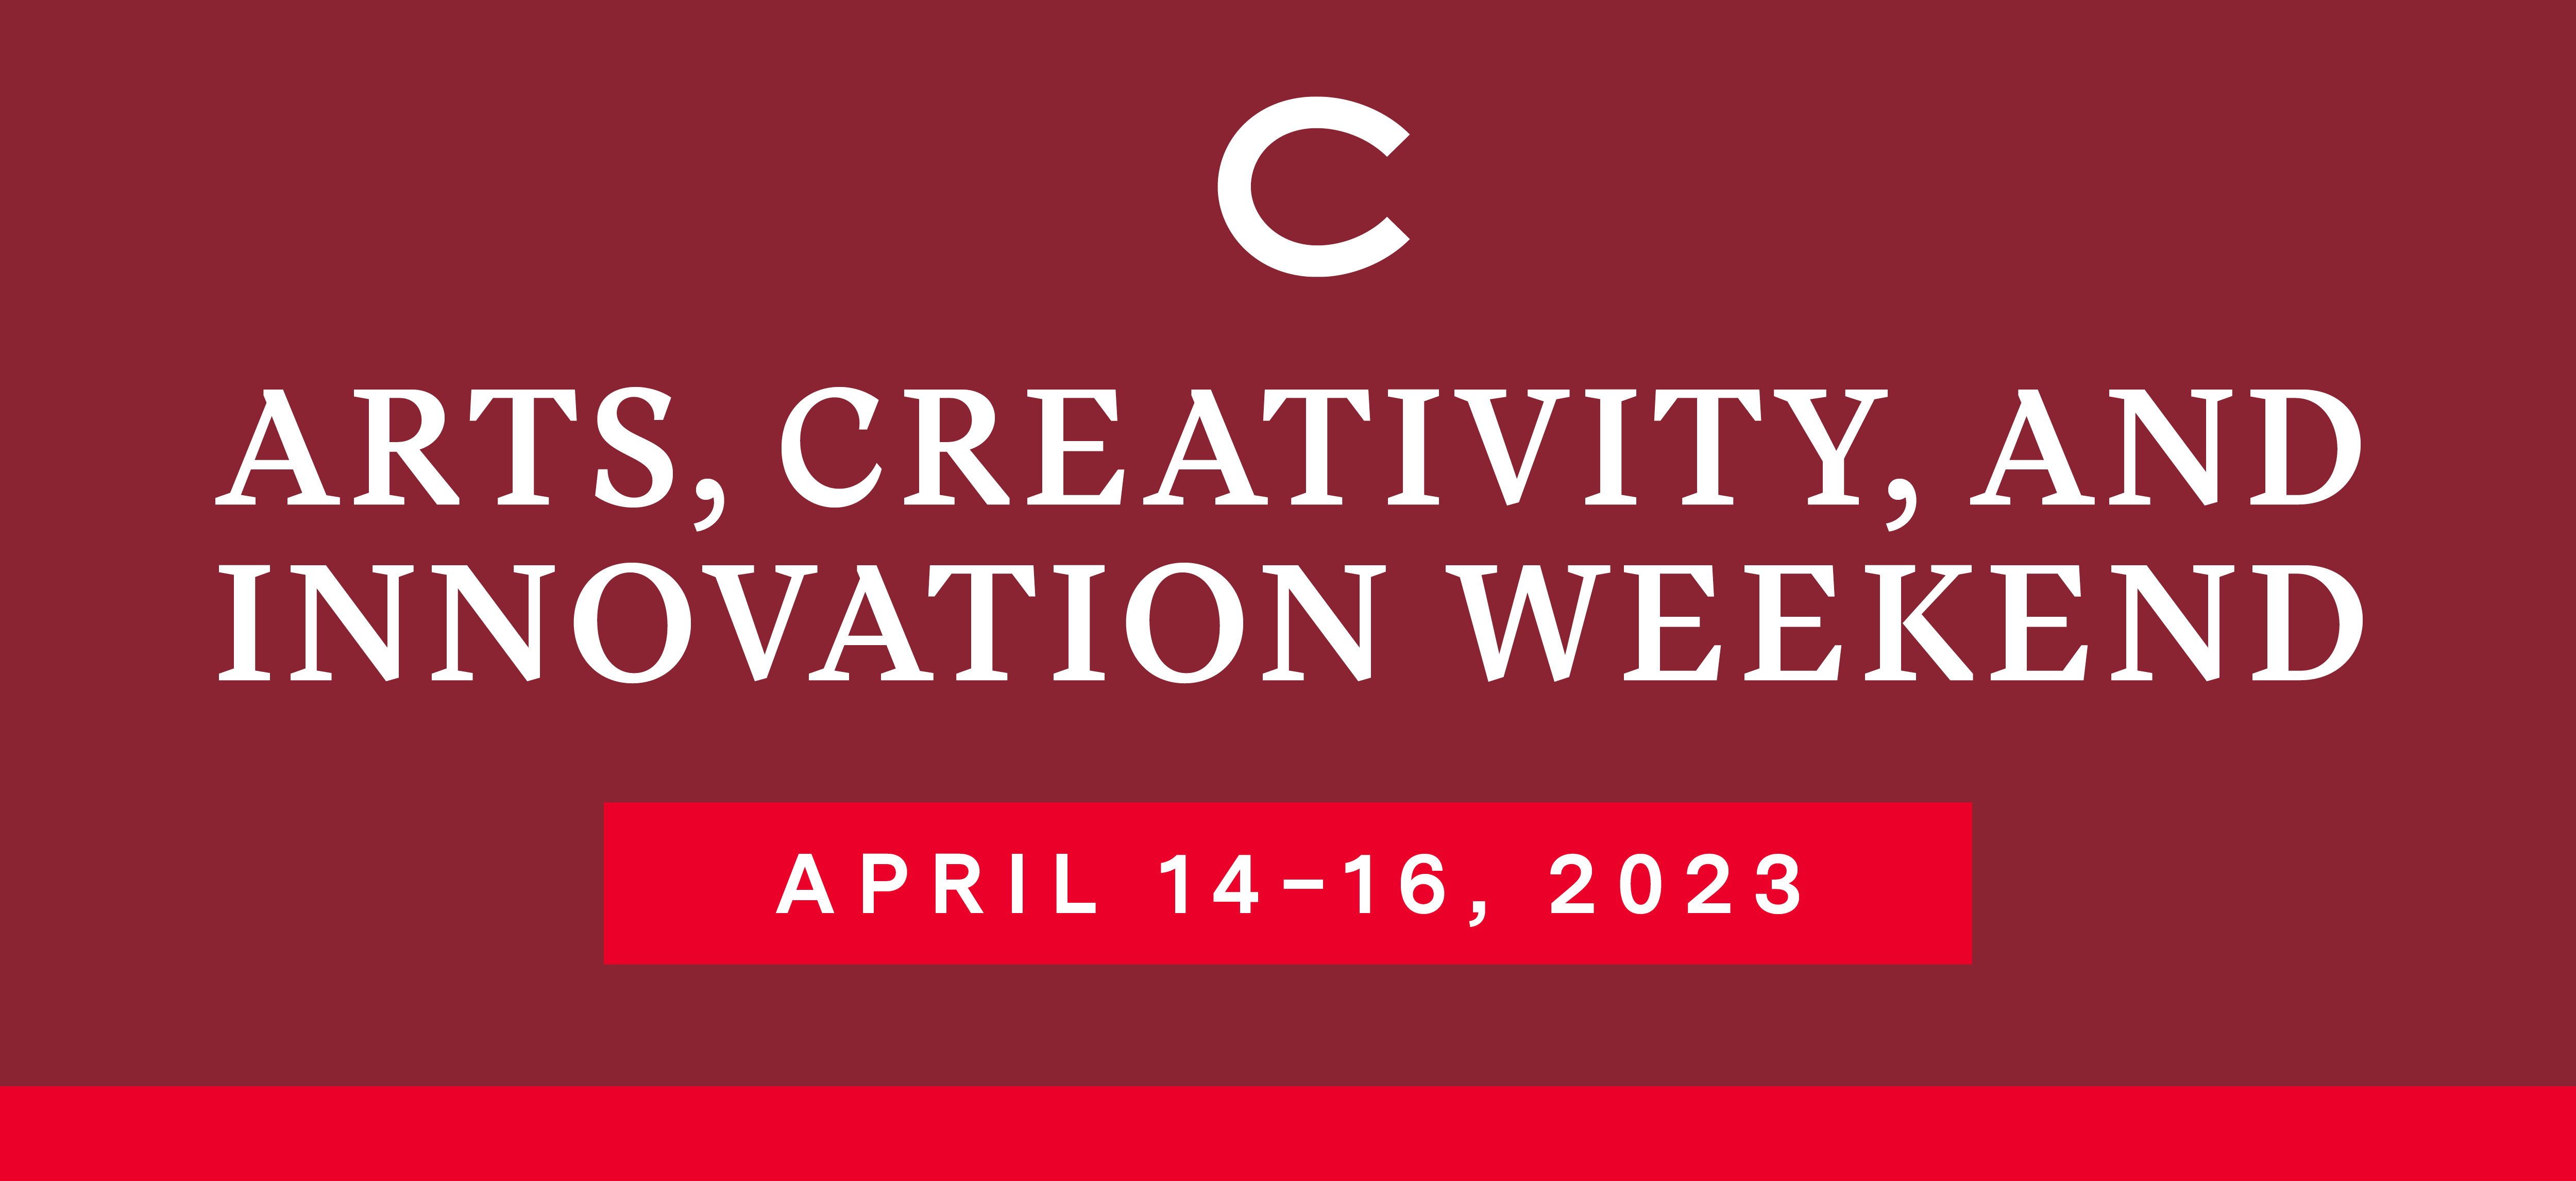 Arts, Creativity and Innovation Weekend. April 14-16, 2023.